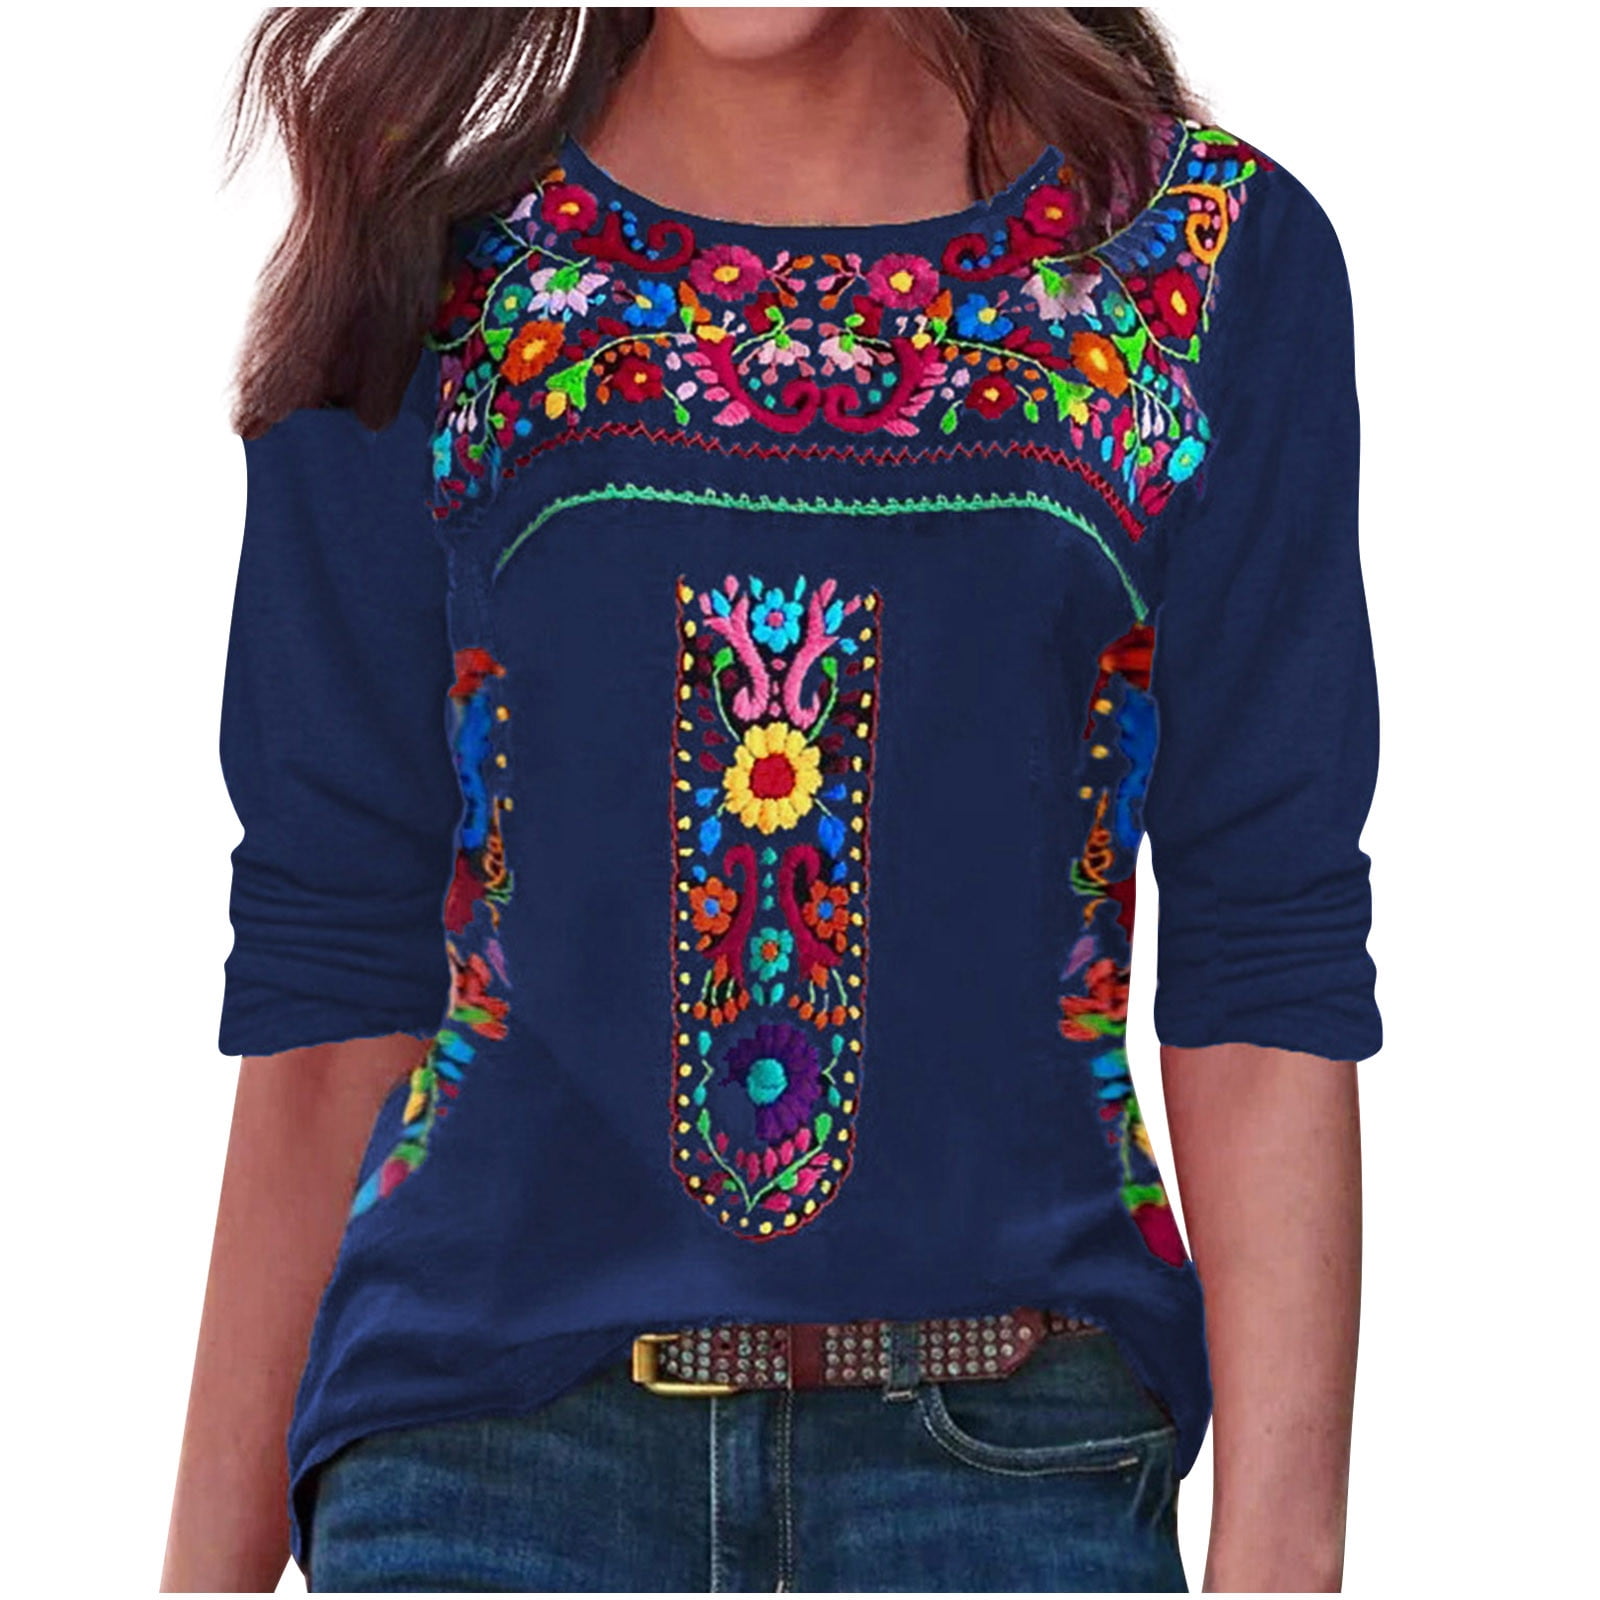 Mexican Fashion Blouse. Size S-2X. Floral Embroidered Mexican